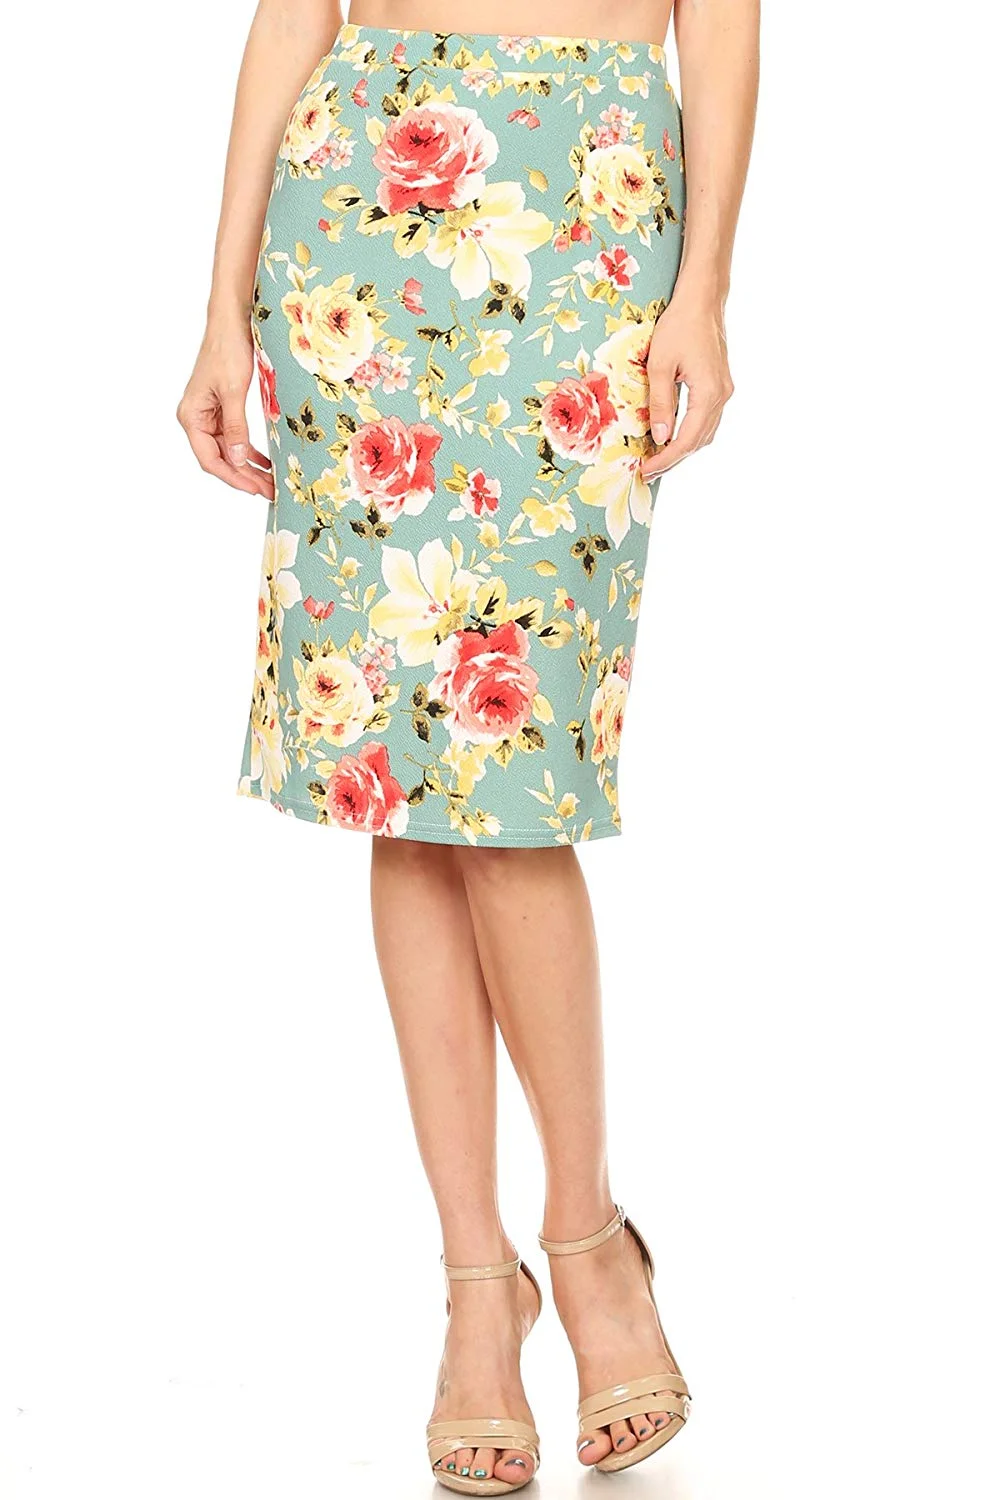 Trendy Print and Solid Stretch Pencil Skirt